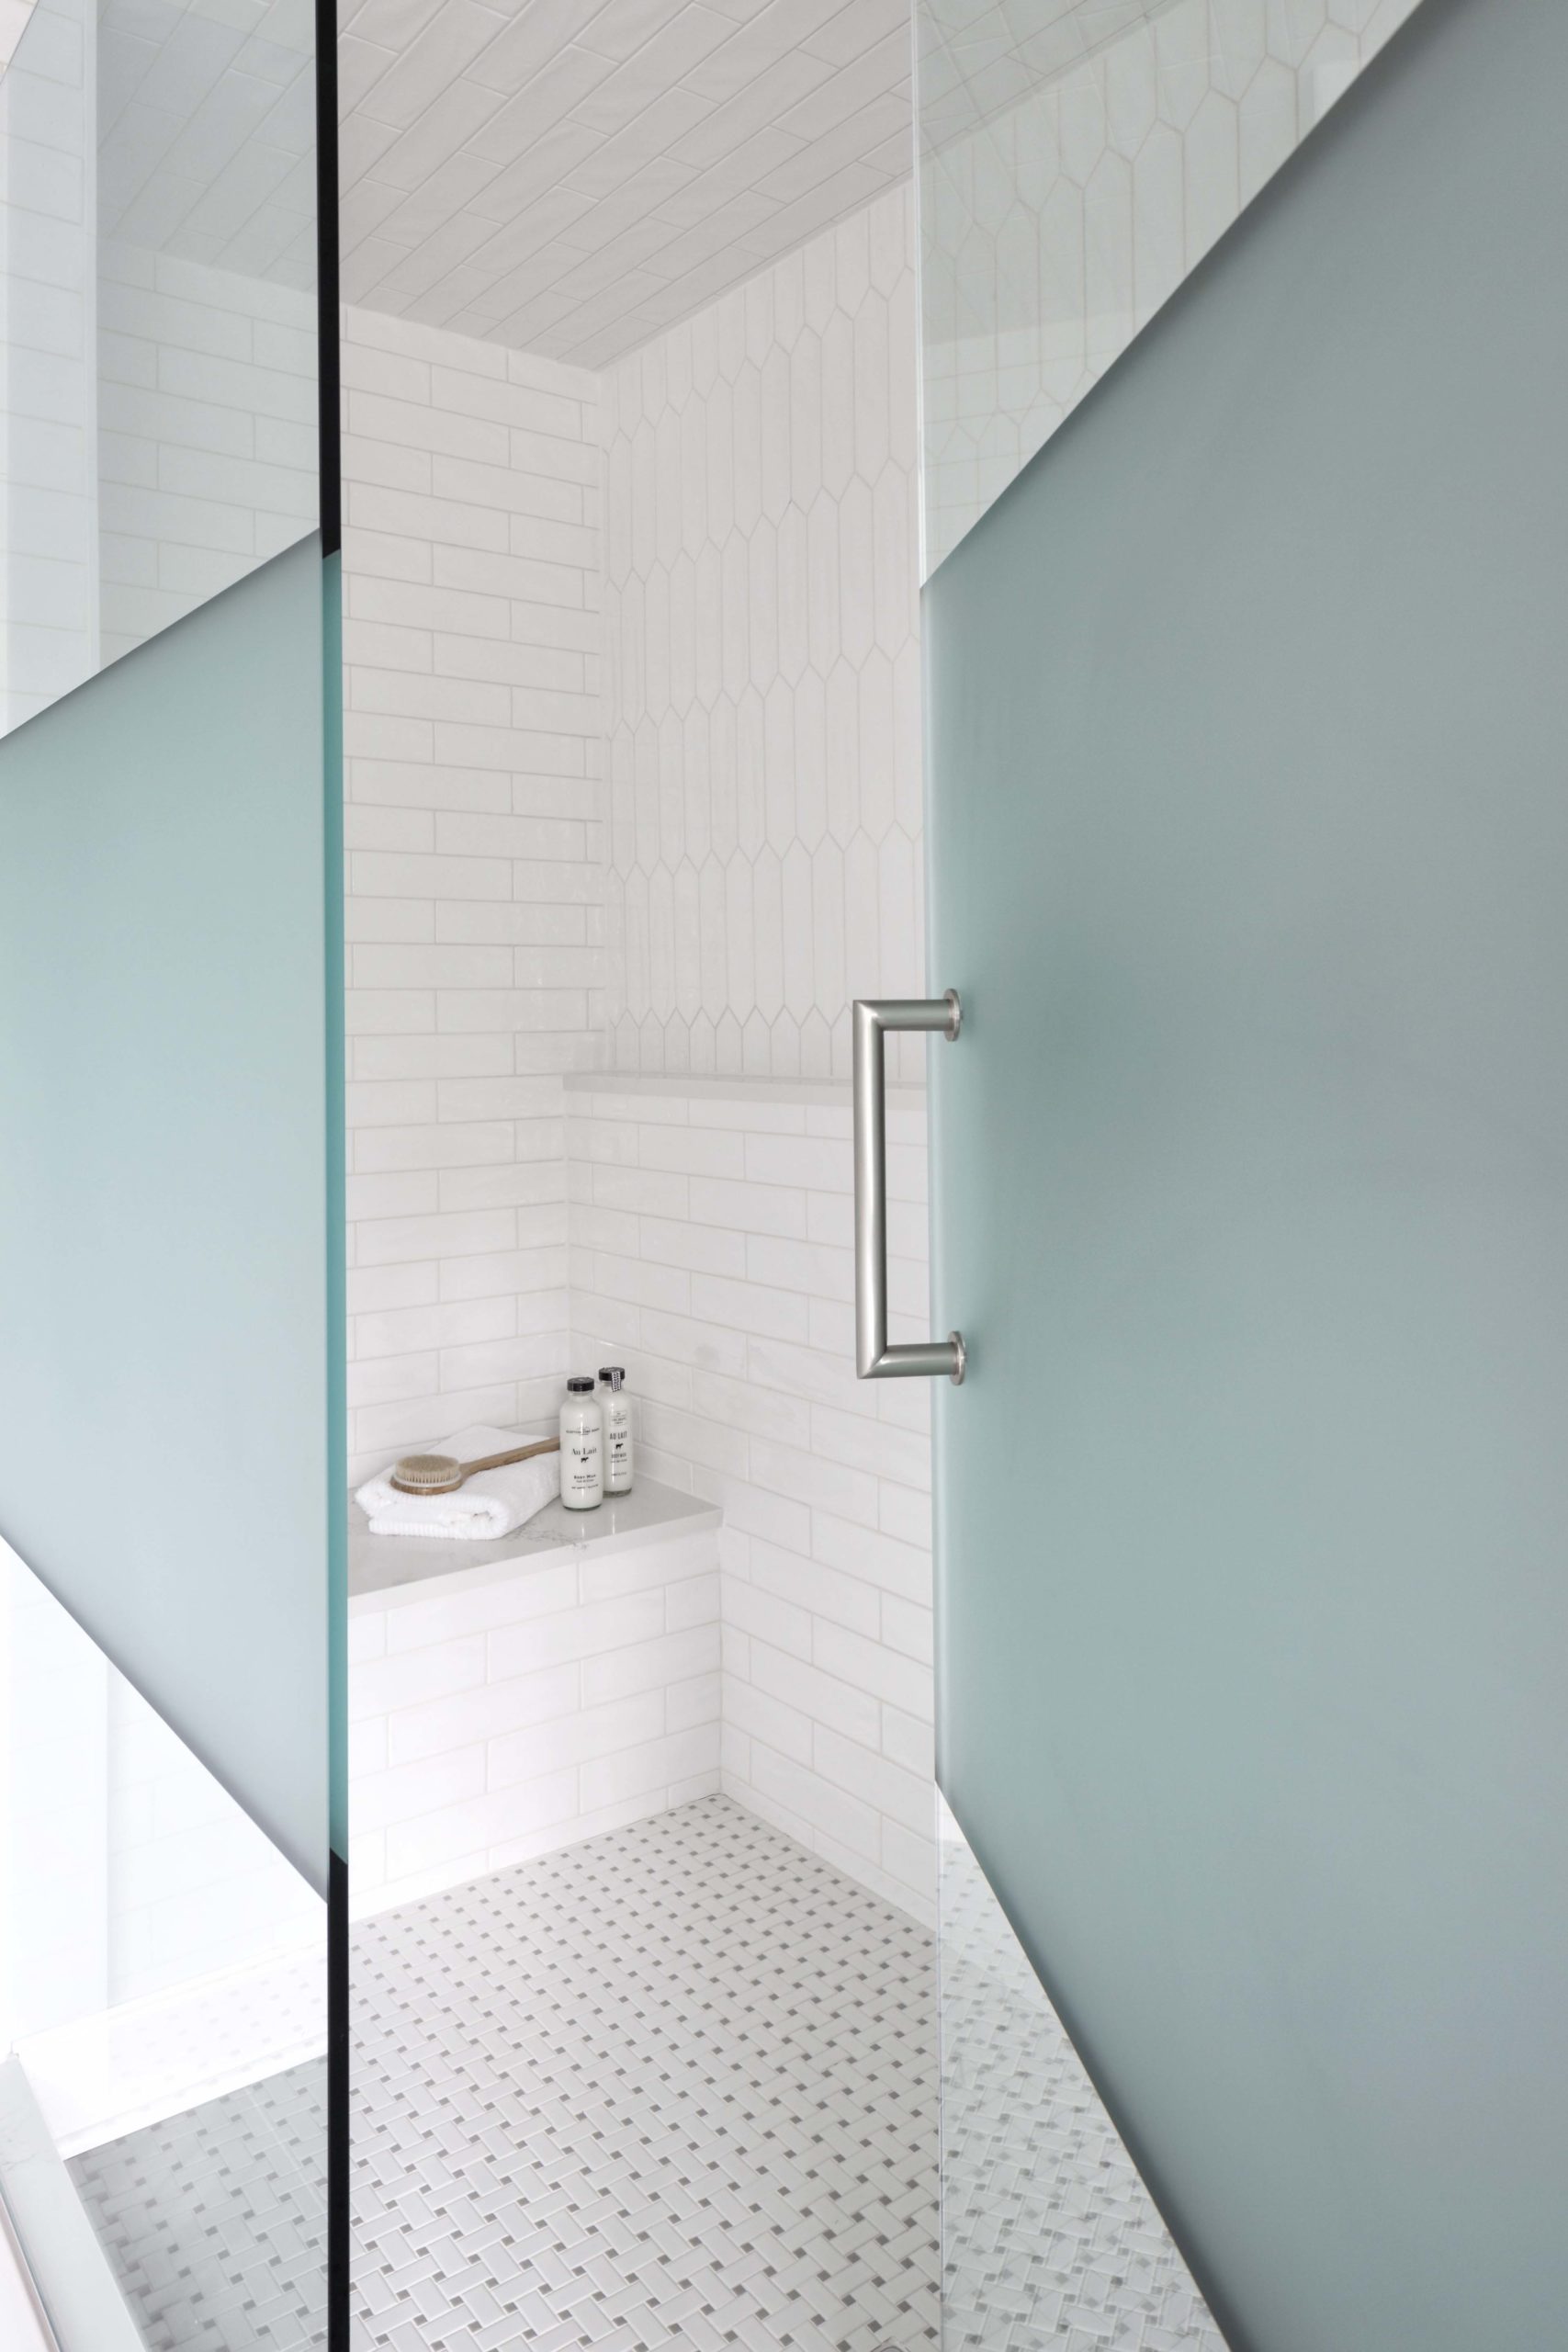 a glass shower door propped open to see the white tile shower inside